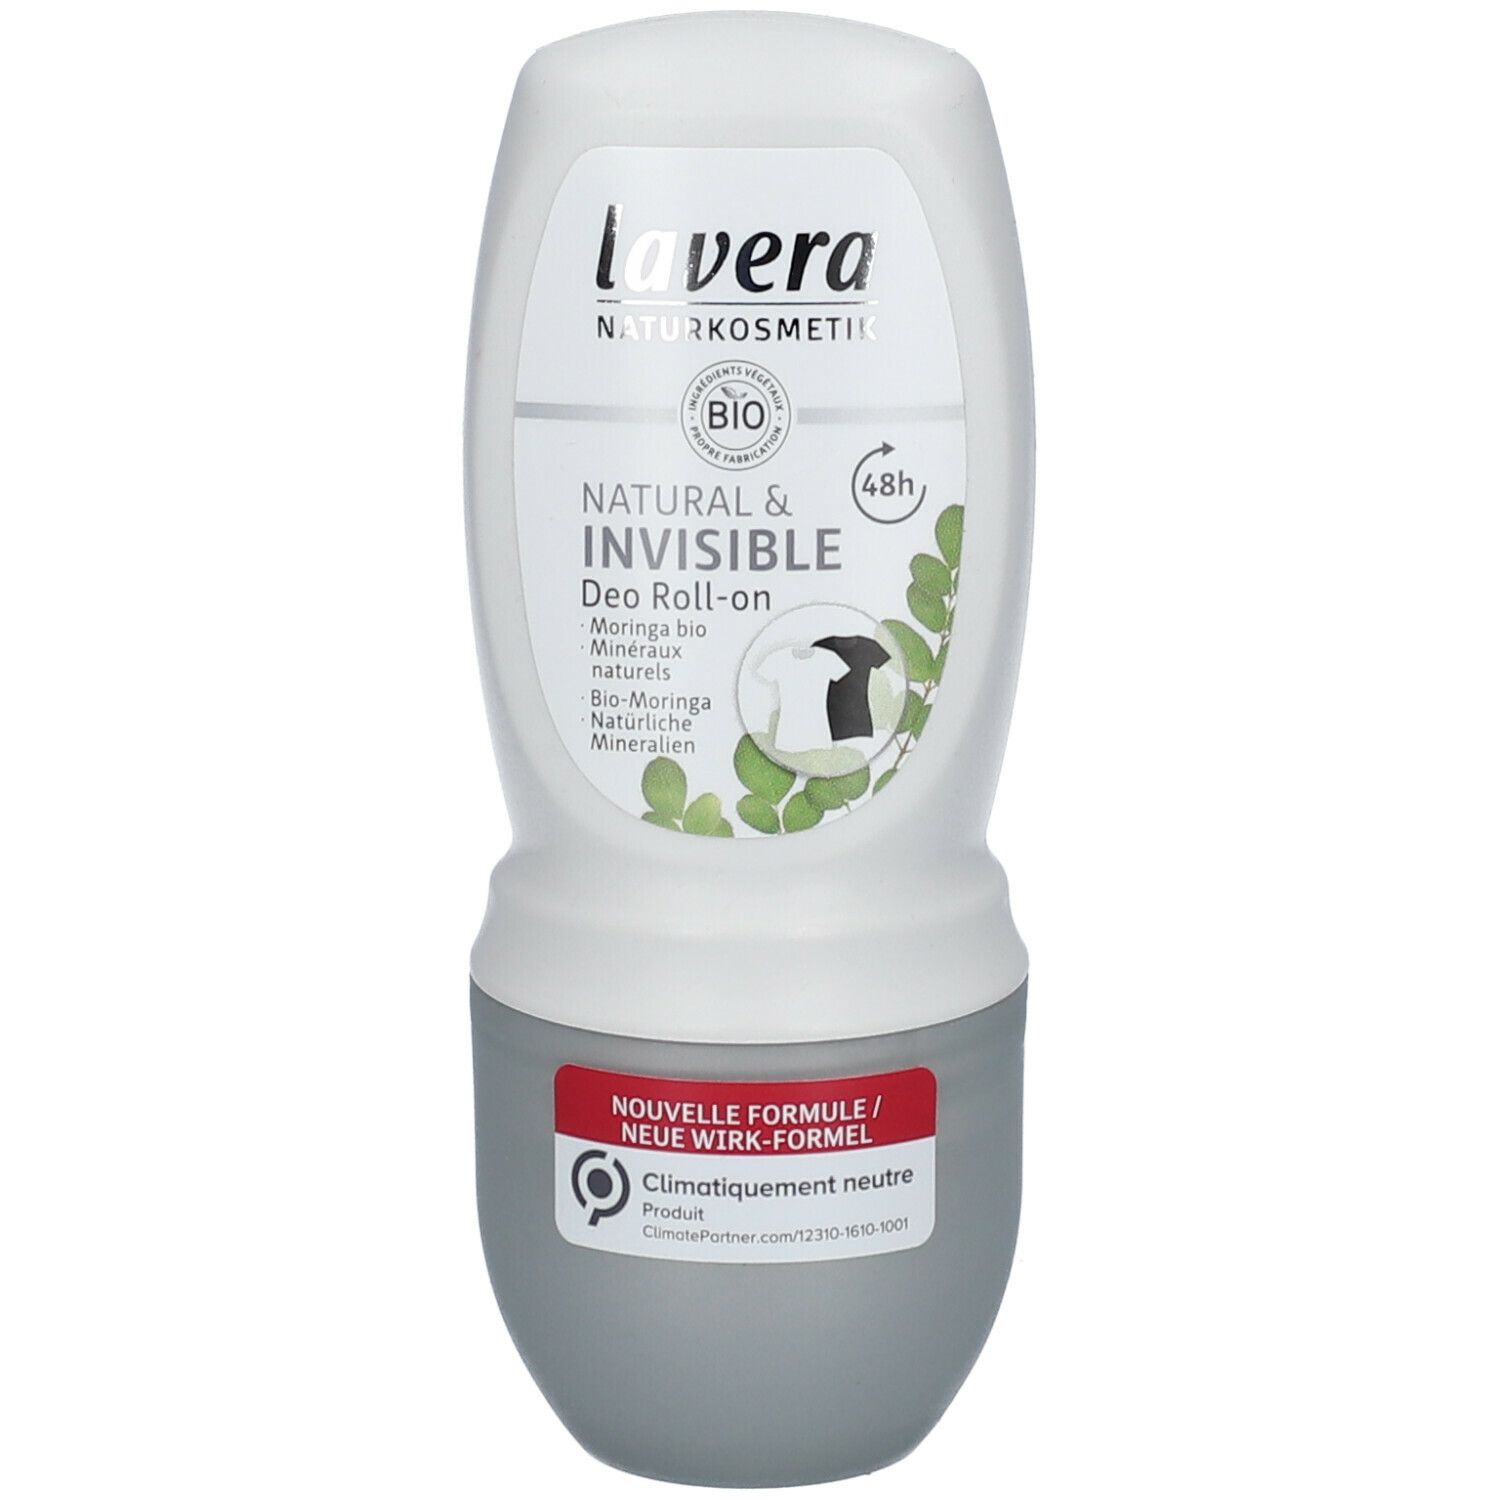 Image of lavera Deo Roll-on NATURAL & INVISIBLE